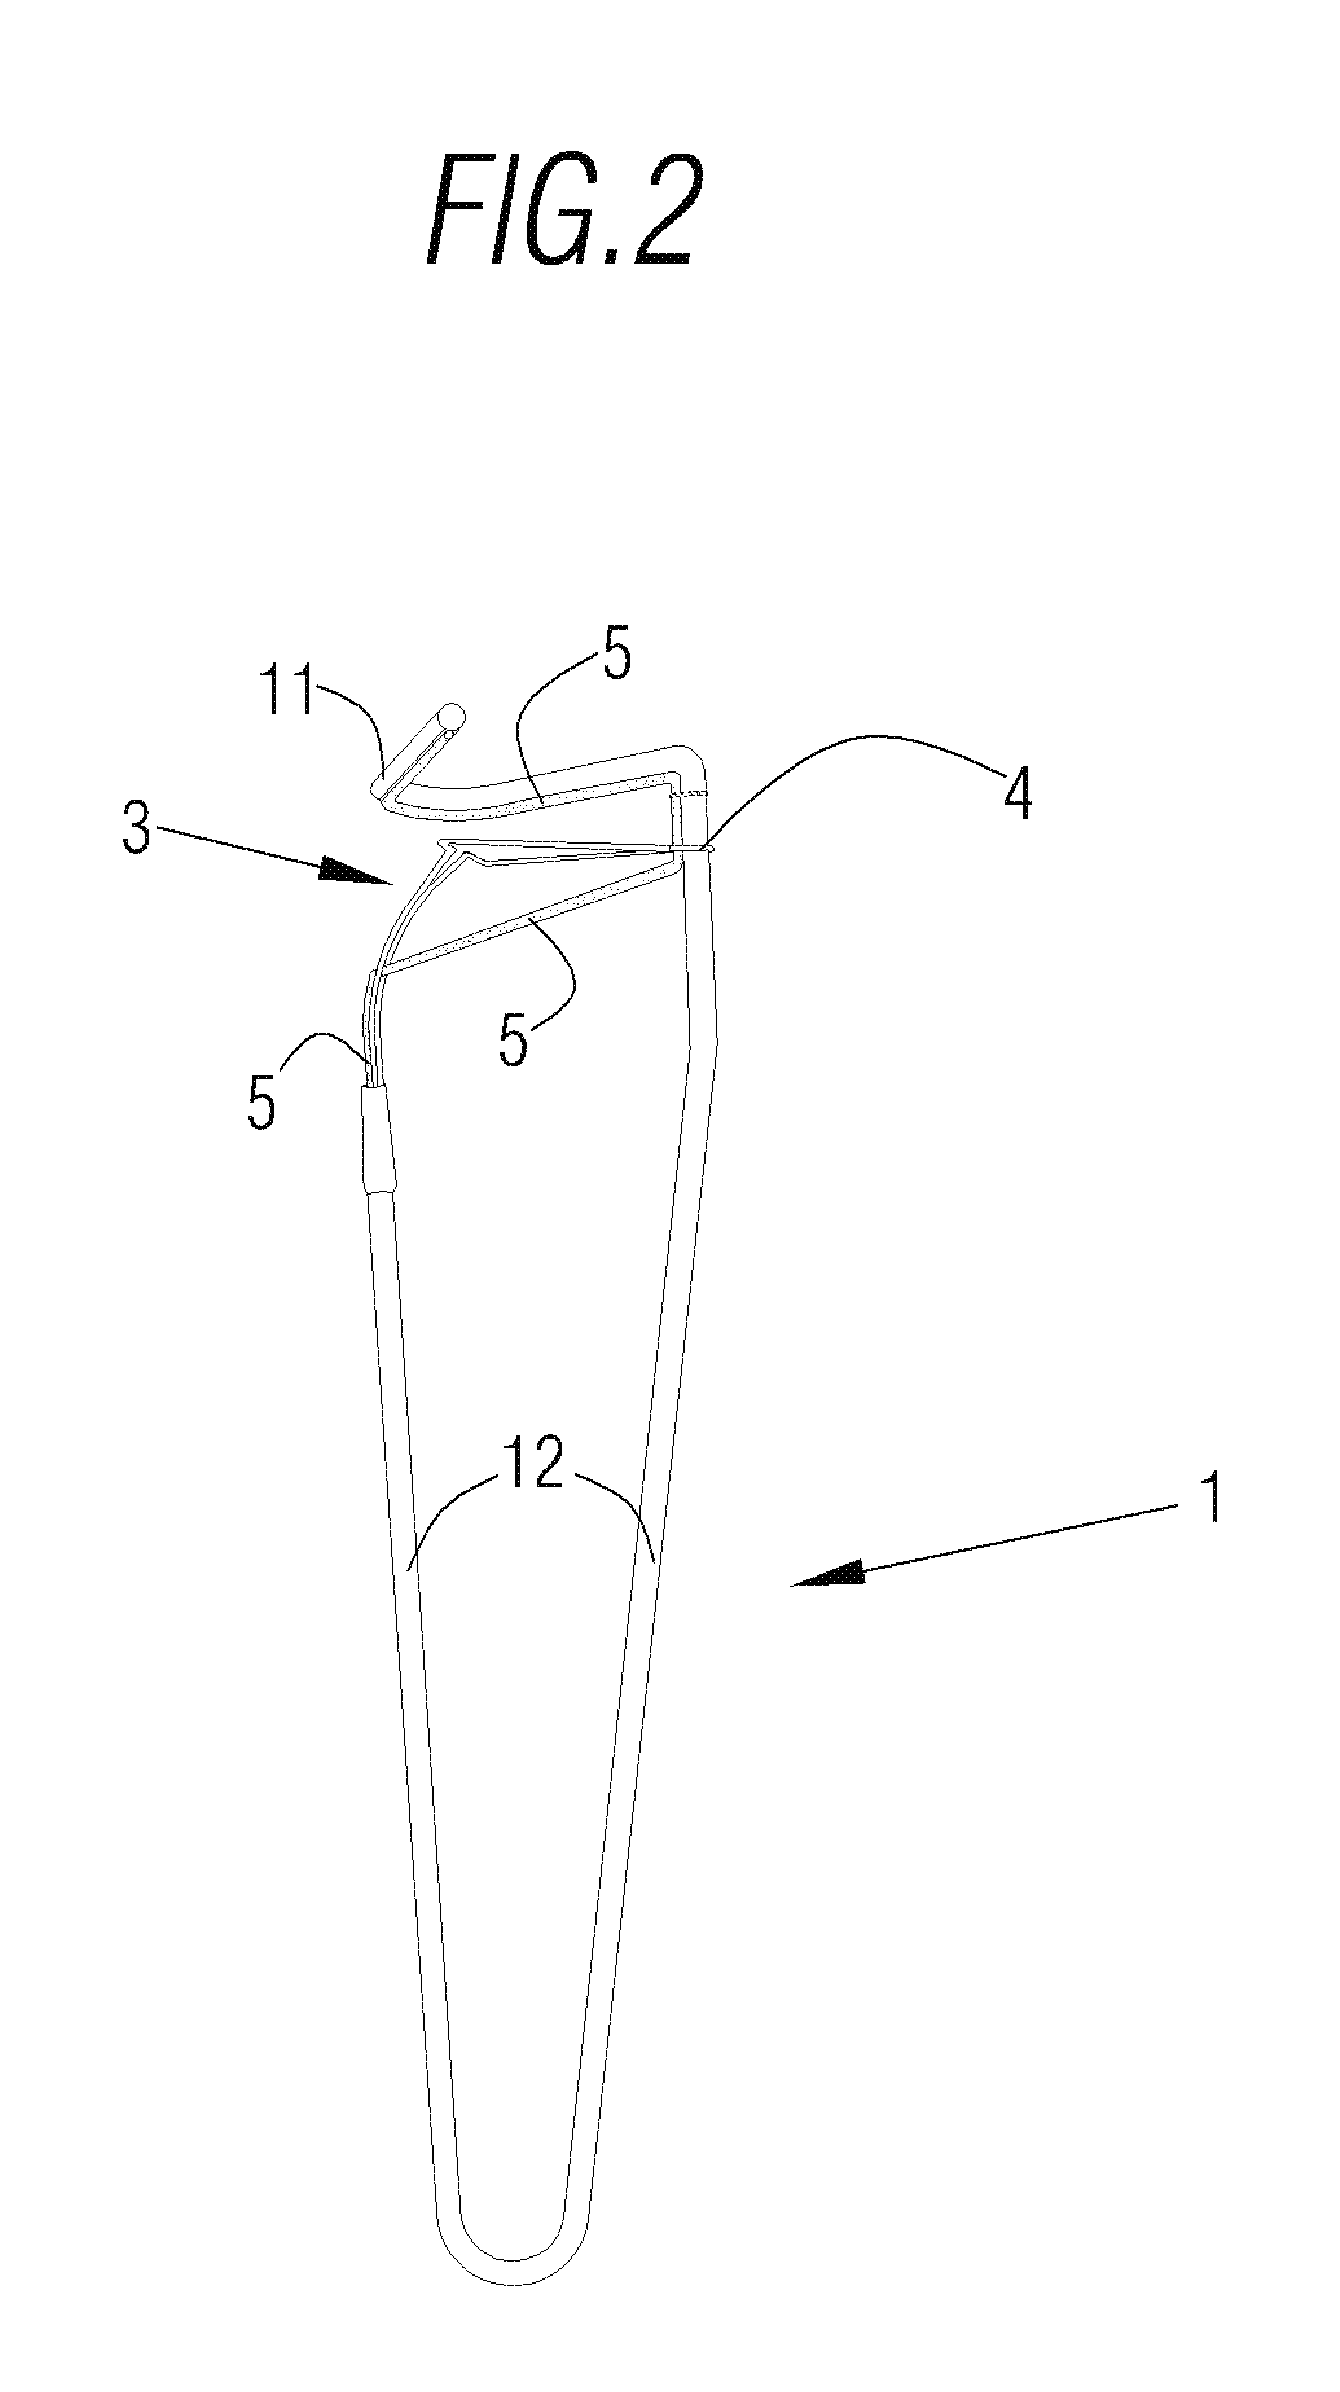 Constituent device for furniture